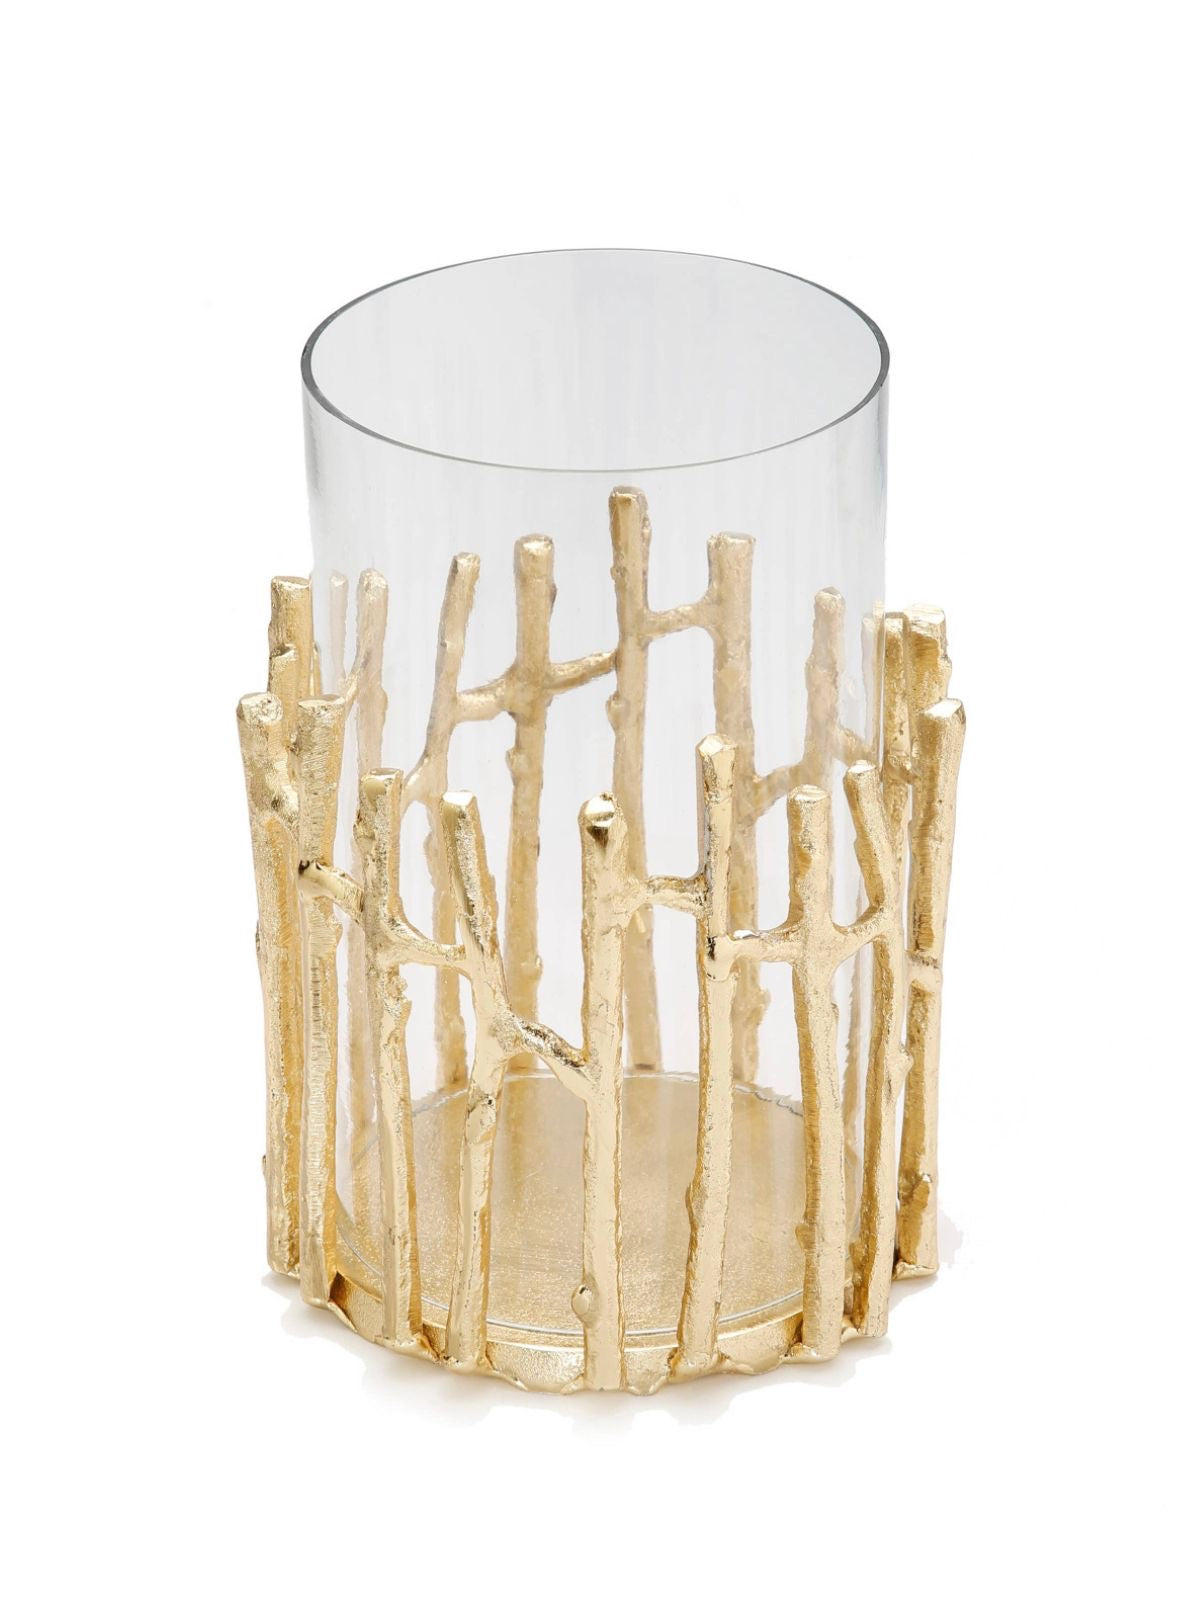 7 inch Glass Hurricane Floral Vase with Gold Brass Twig Design | KYA Home Decor.